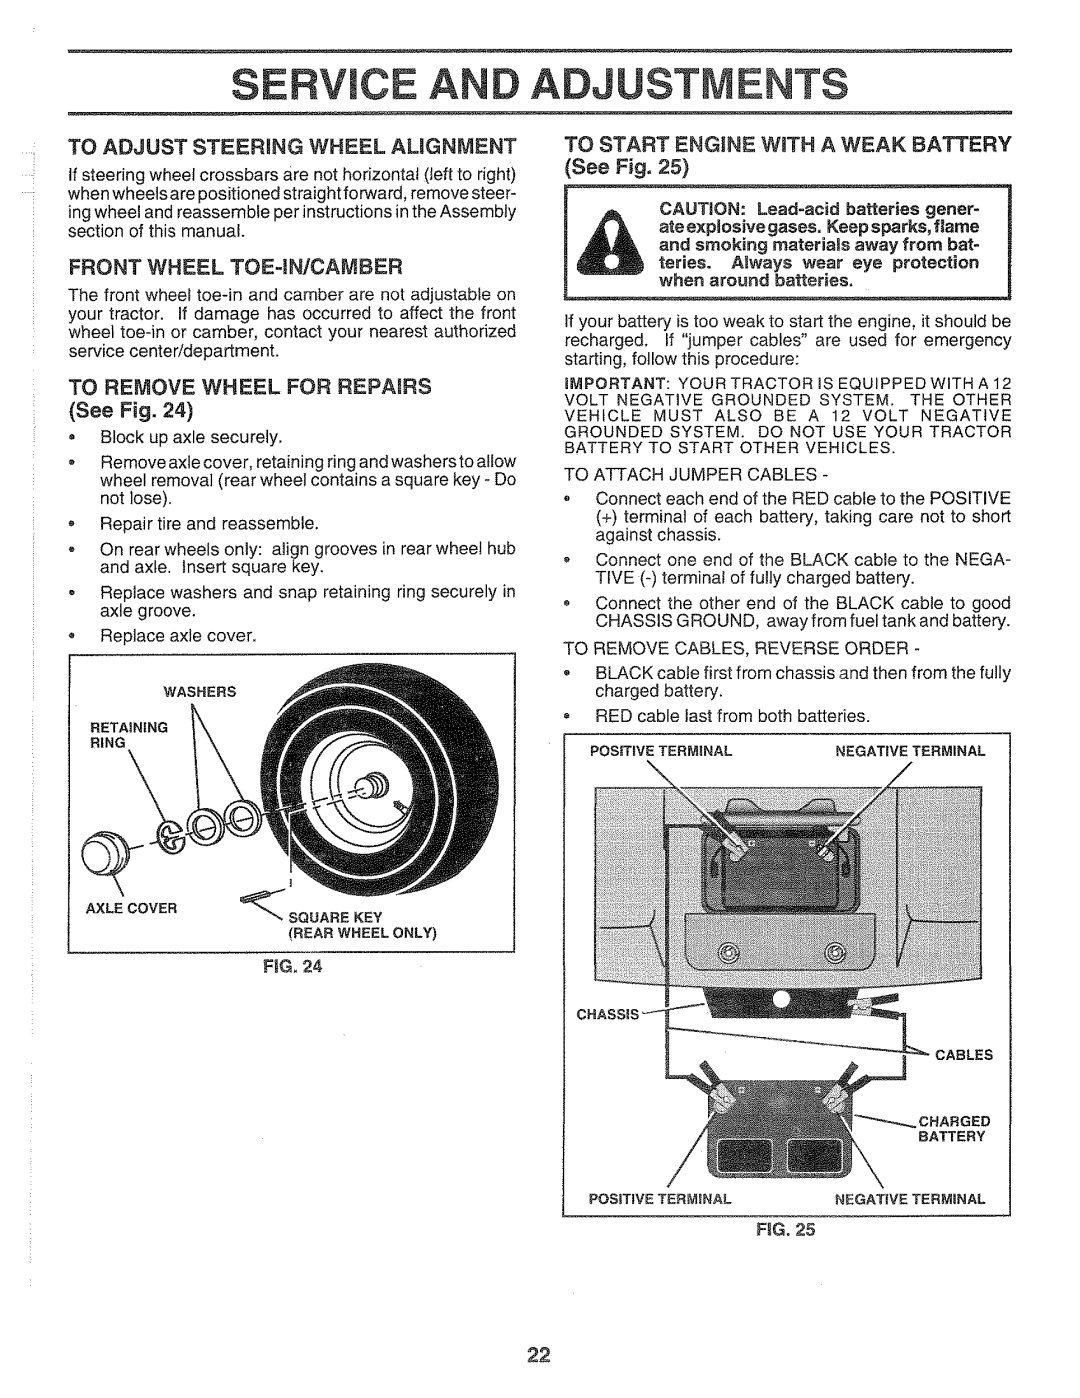 Sears 917.2565 manual Service An, Adjustments, To Adjust Steering Wheel Alignment, Front Wheel Toe-In/Camber, FiG 